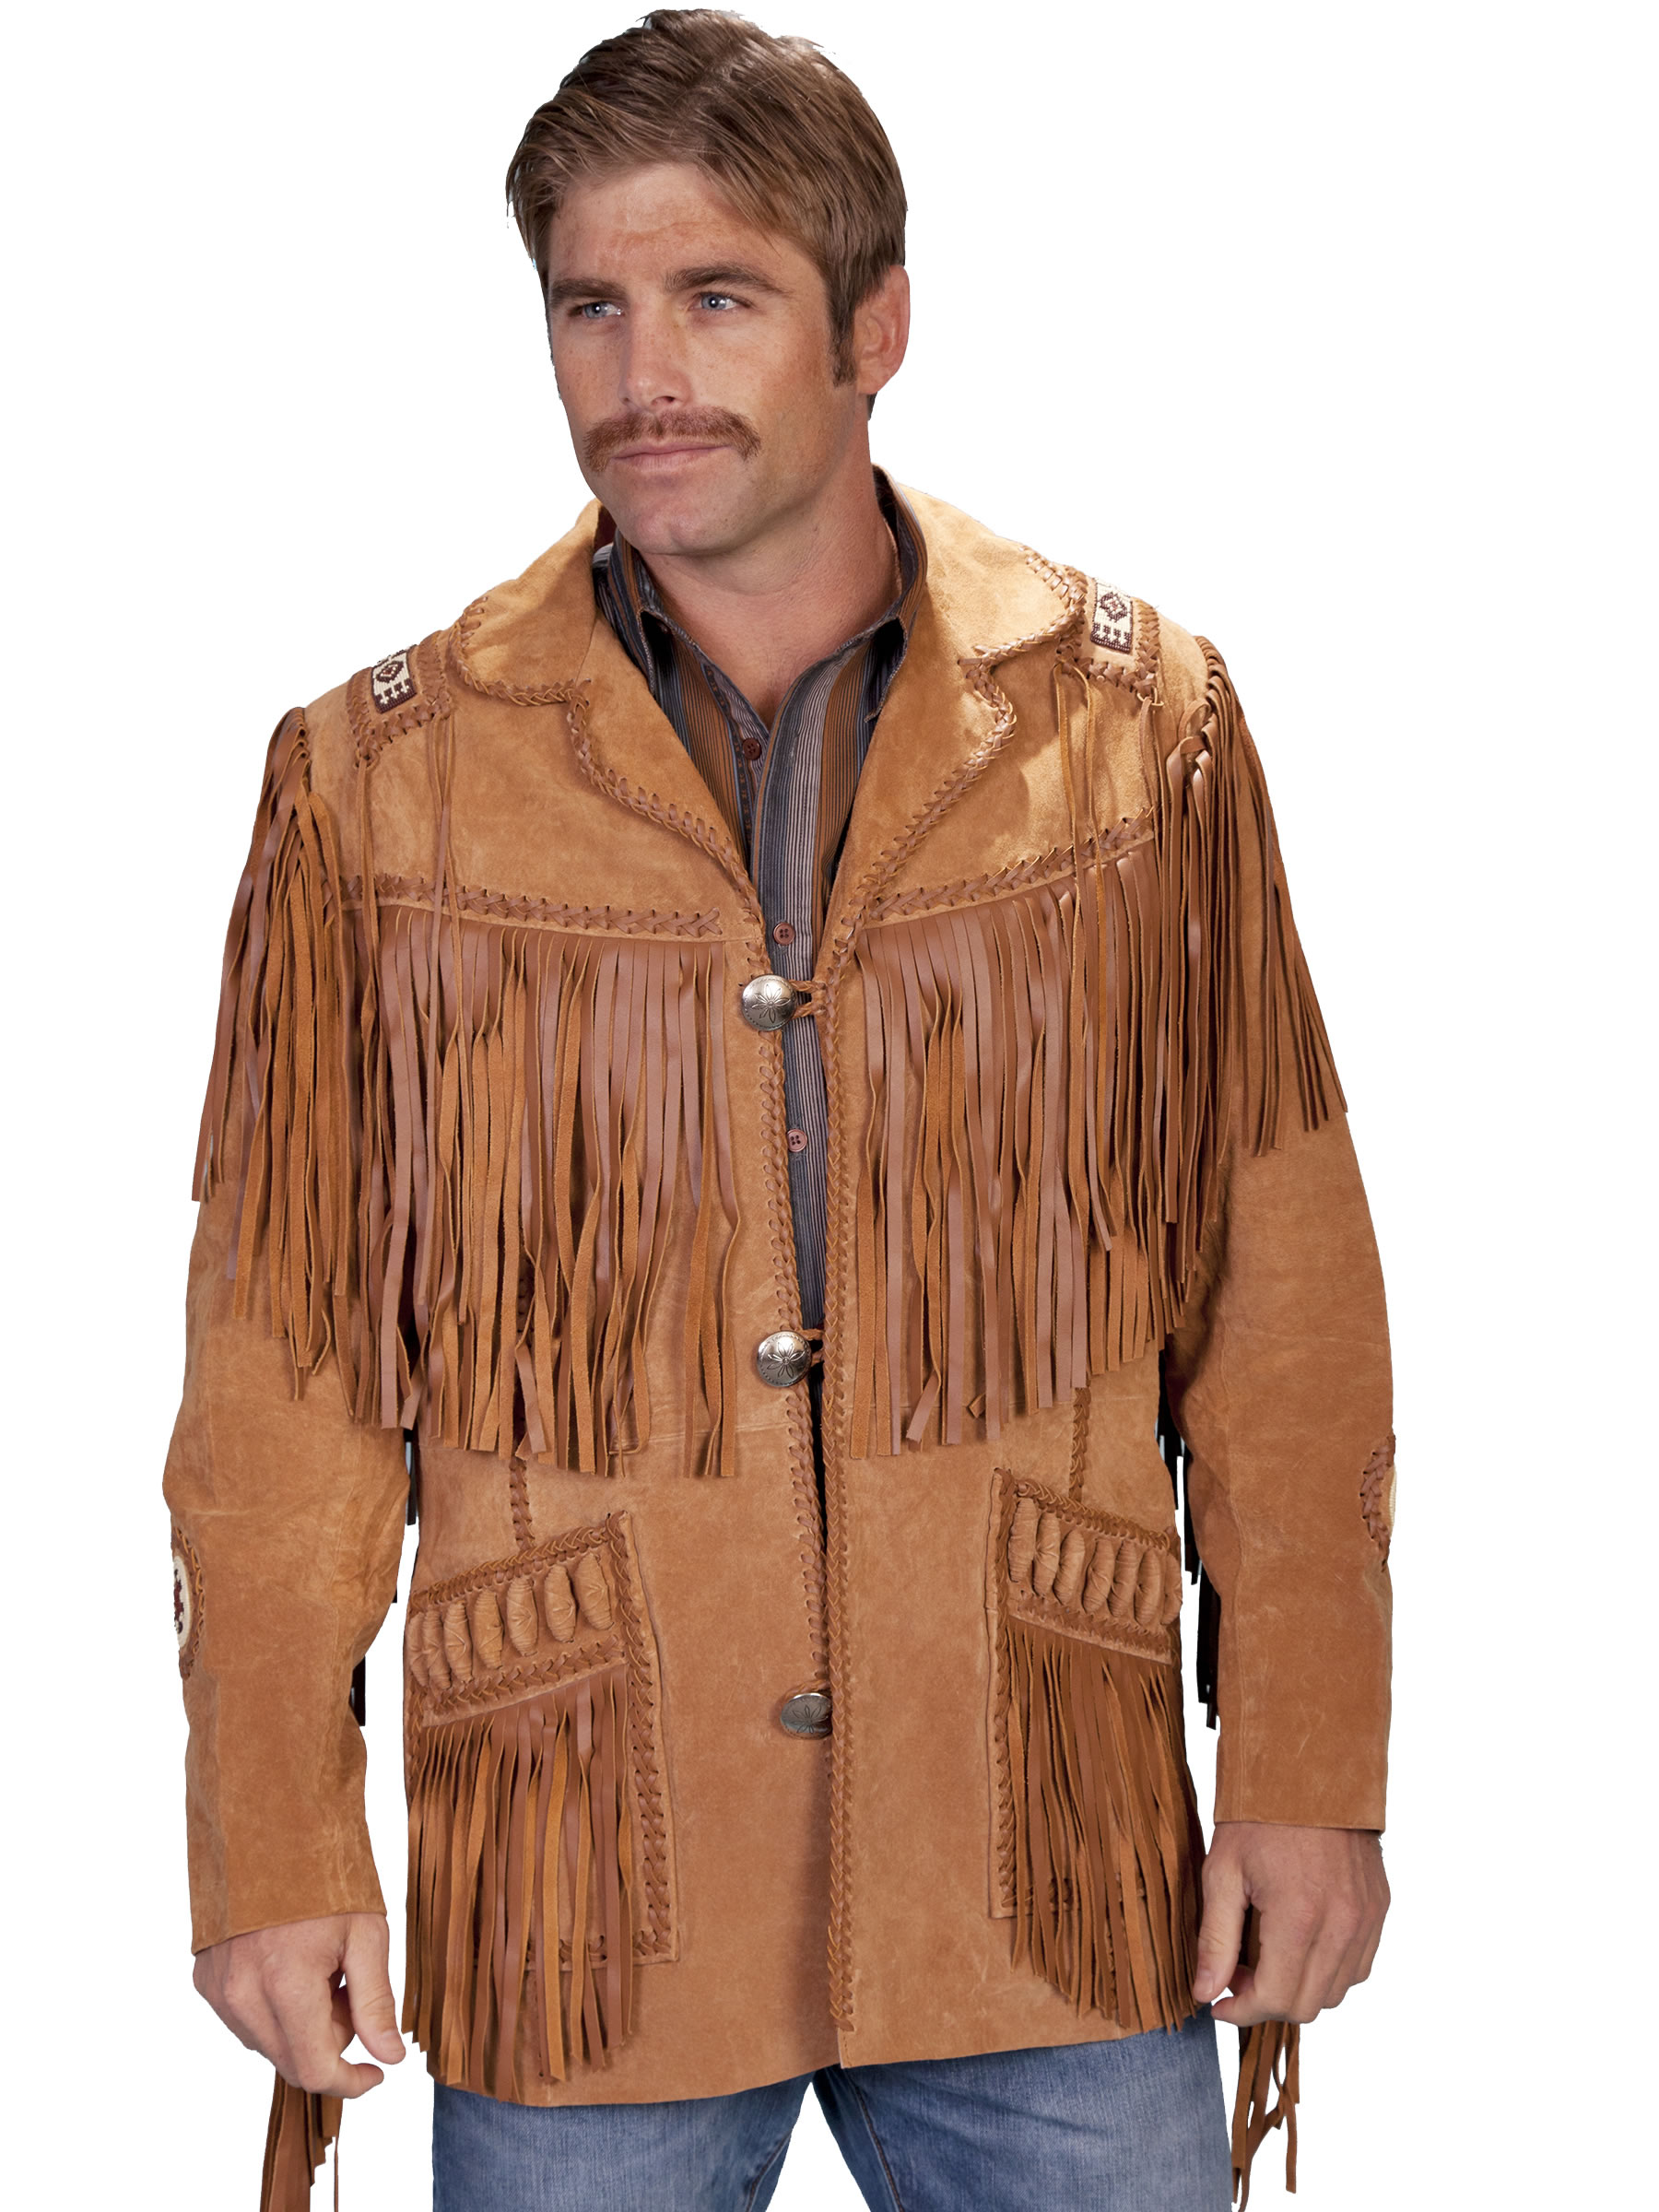 Pungo Ridge - Scully Men's Boar Suede Fringed Jacket - Bourbon, Scully ...